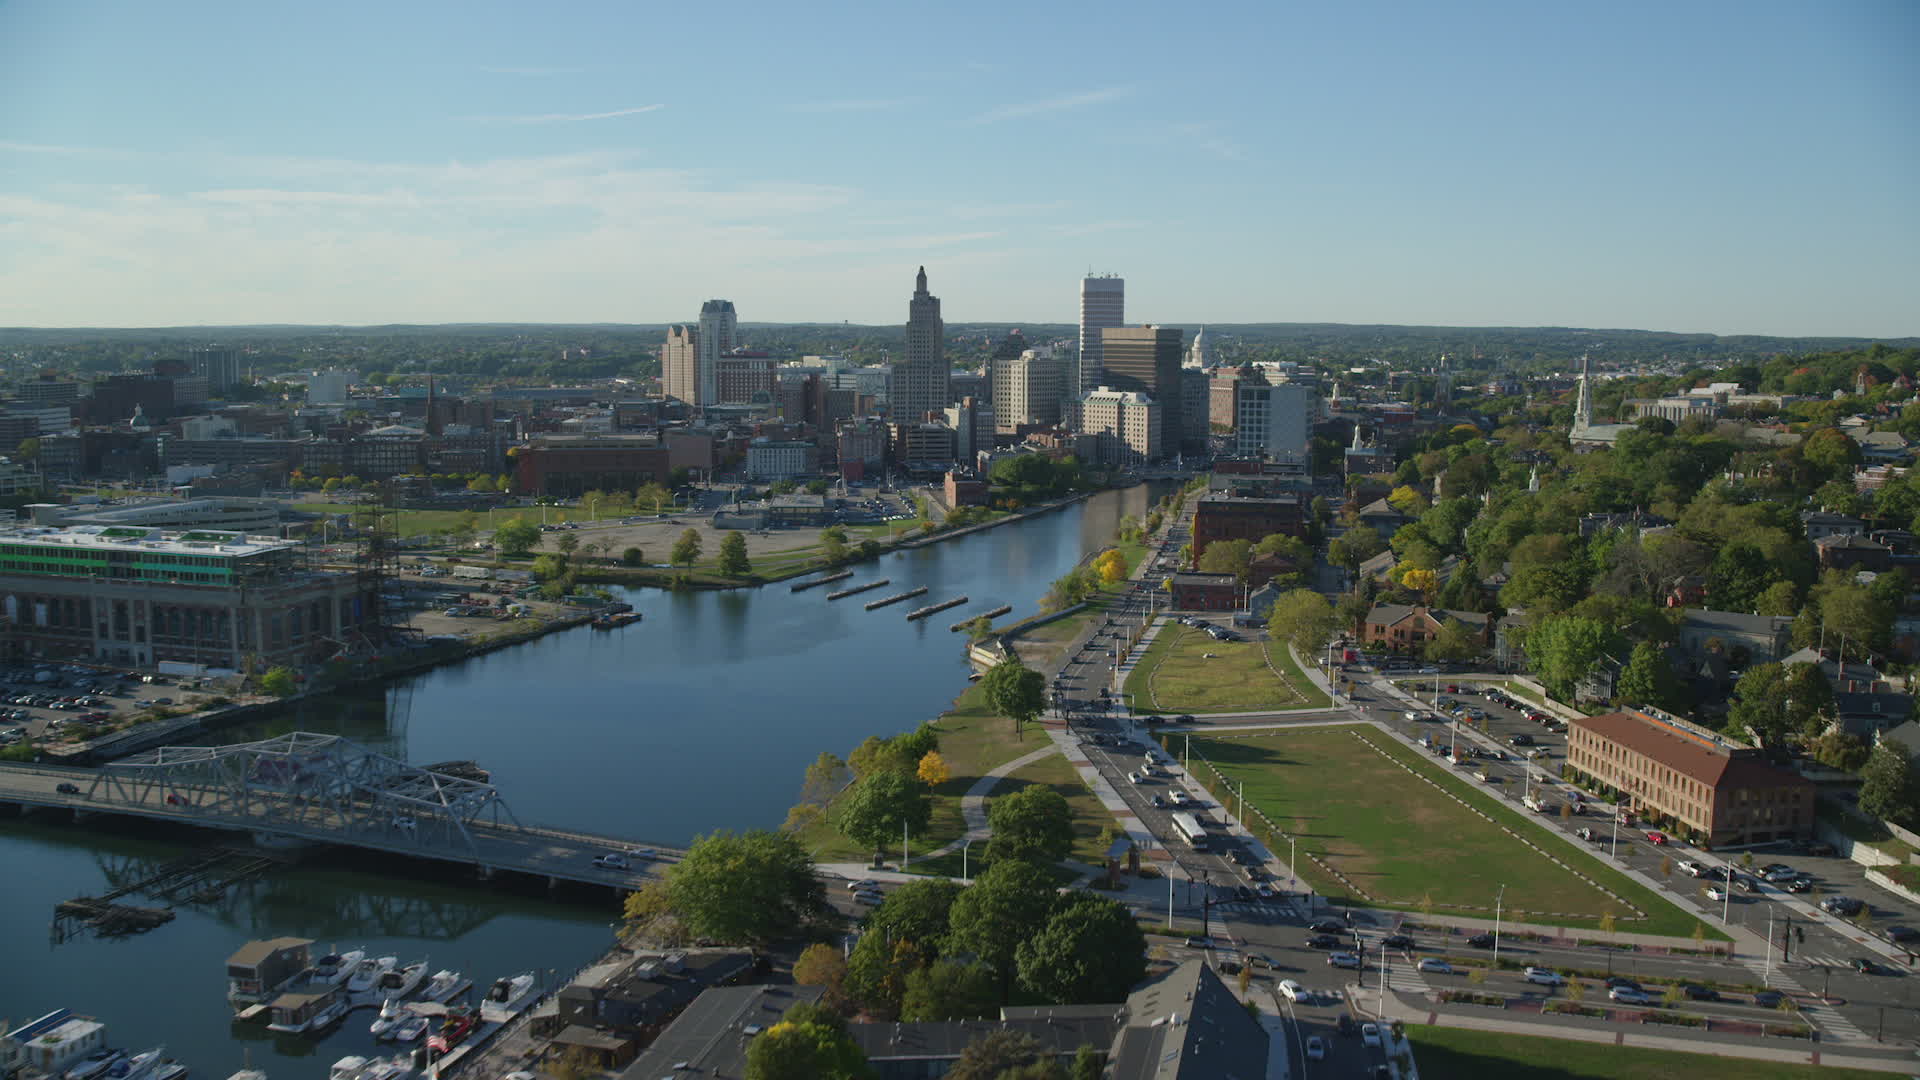 6k stock footage aerial video flying by Providence River, approach skyline, Downtown Providence, Rhode Island Aerial Stock Footage AX145_084. Axiom